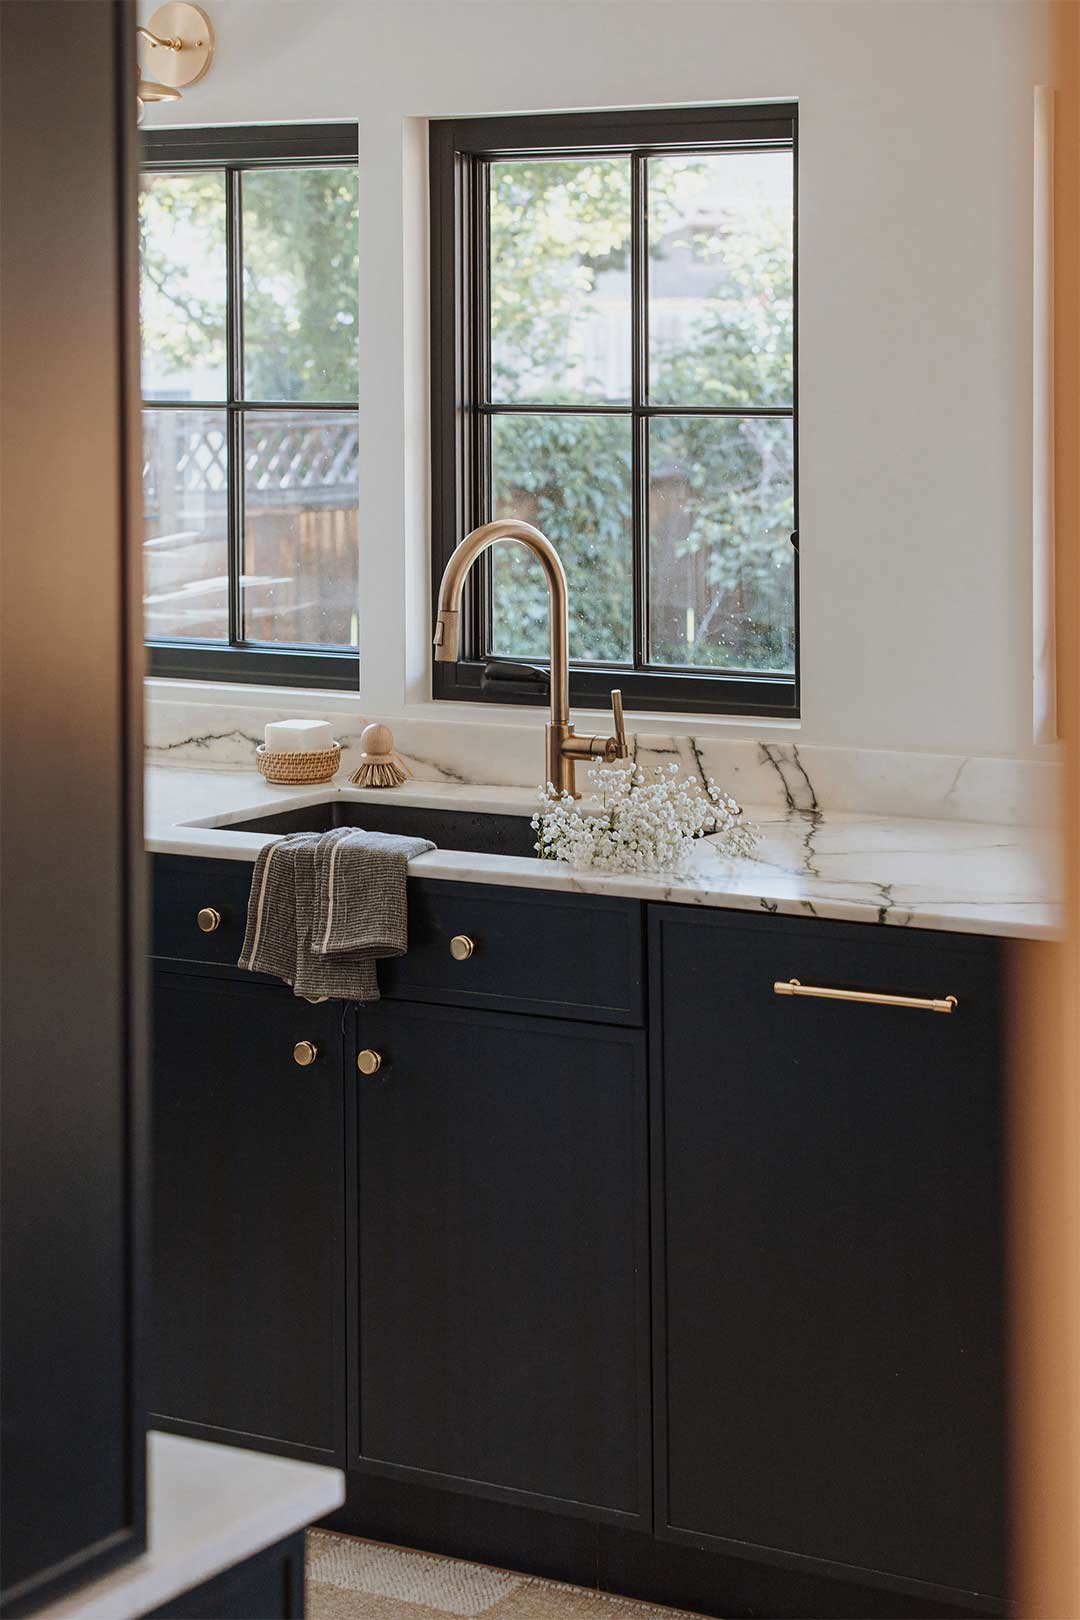 Transitional kitchen sink design in a historic remodel with dark blue cabinets, brass faucet and brass hardware in a Denver historic remodel.